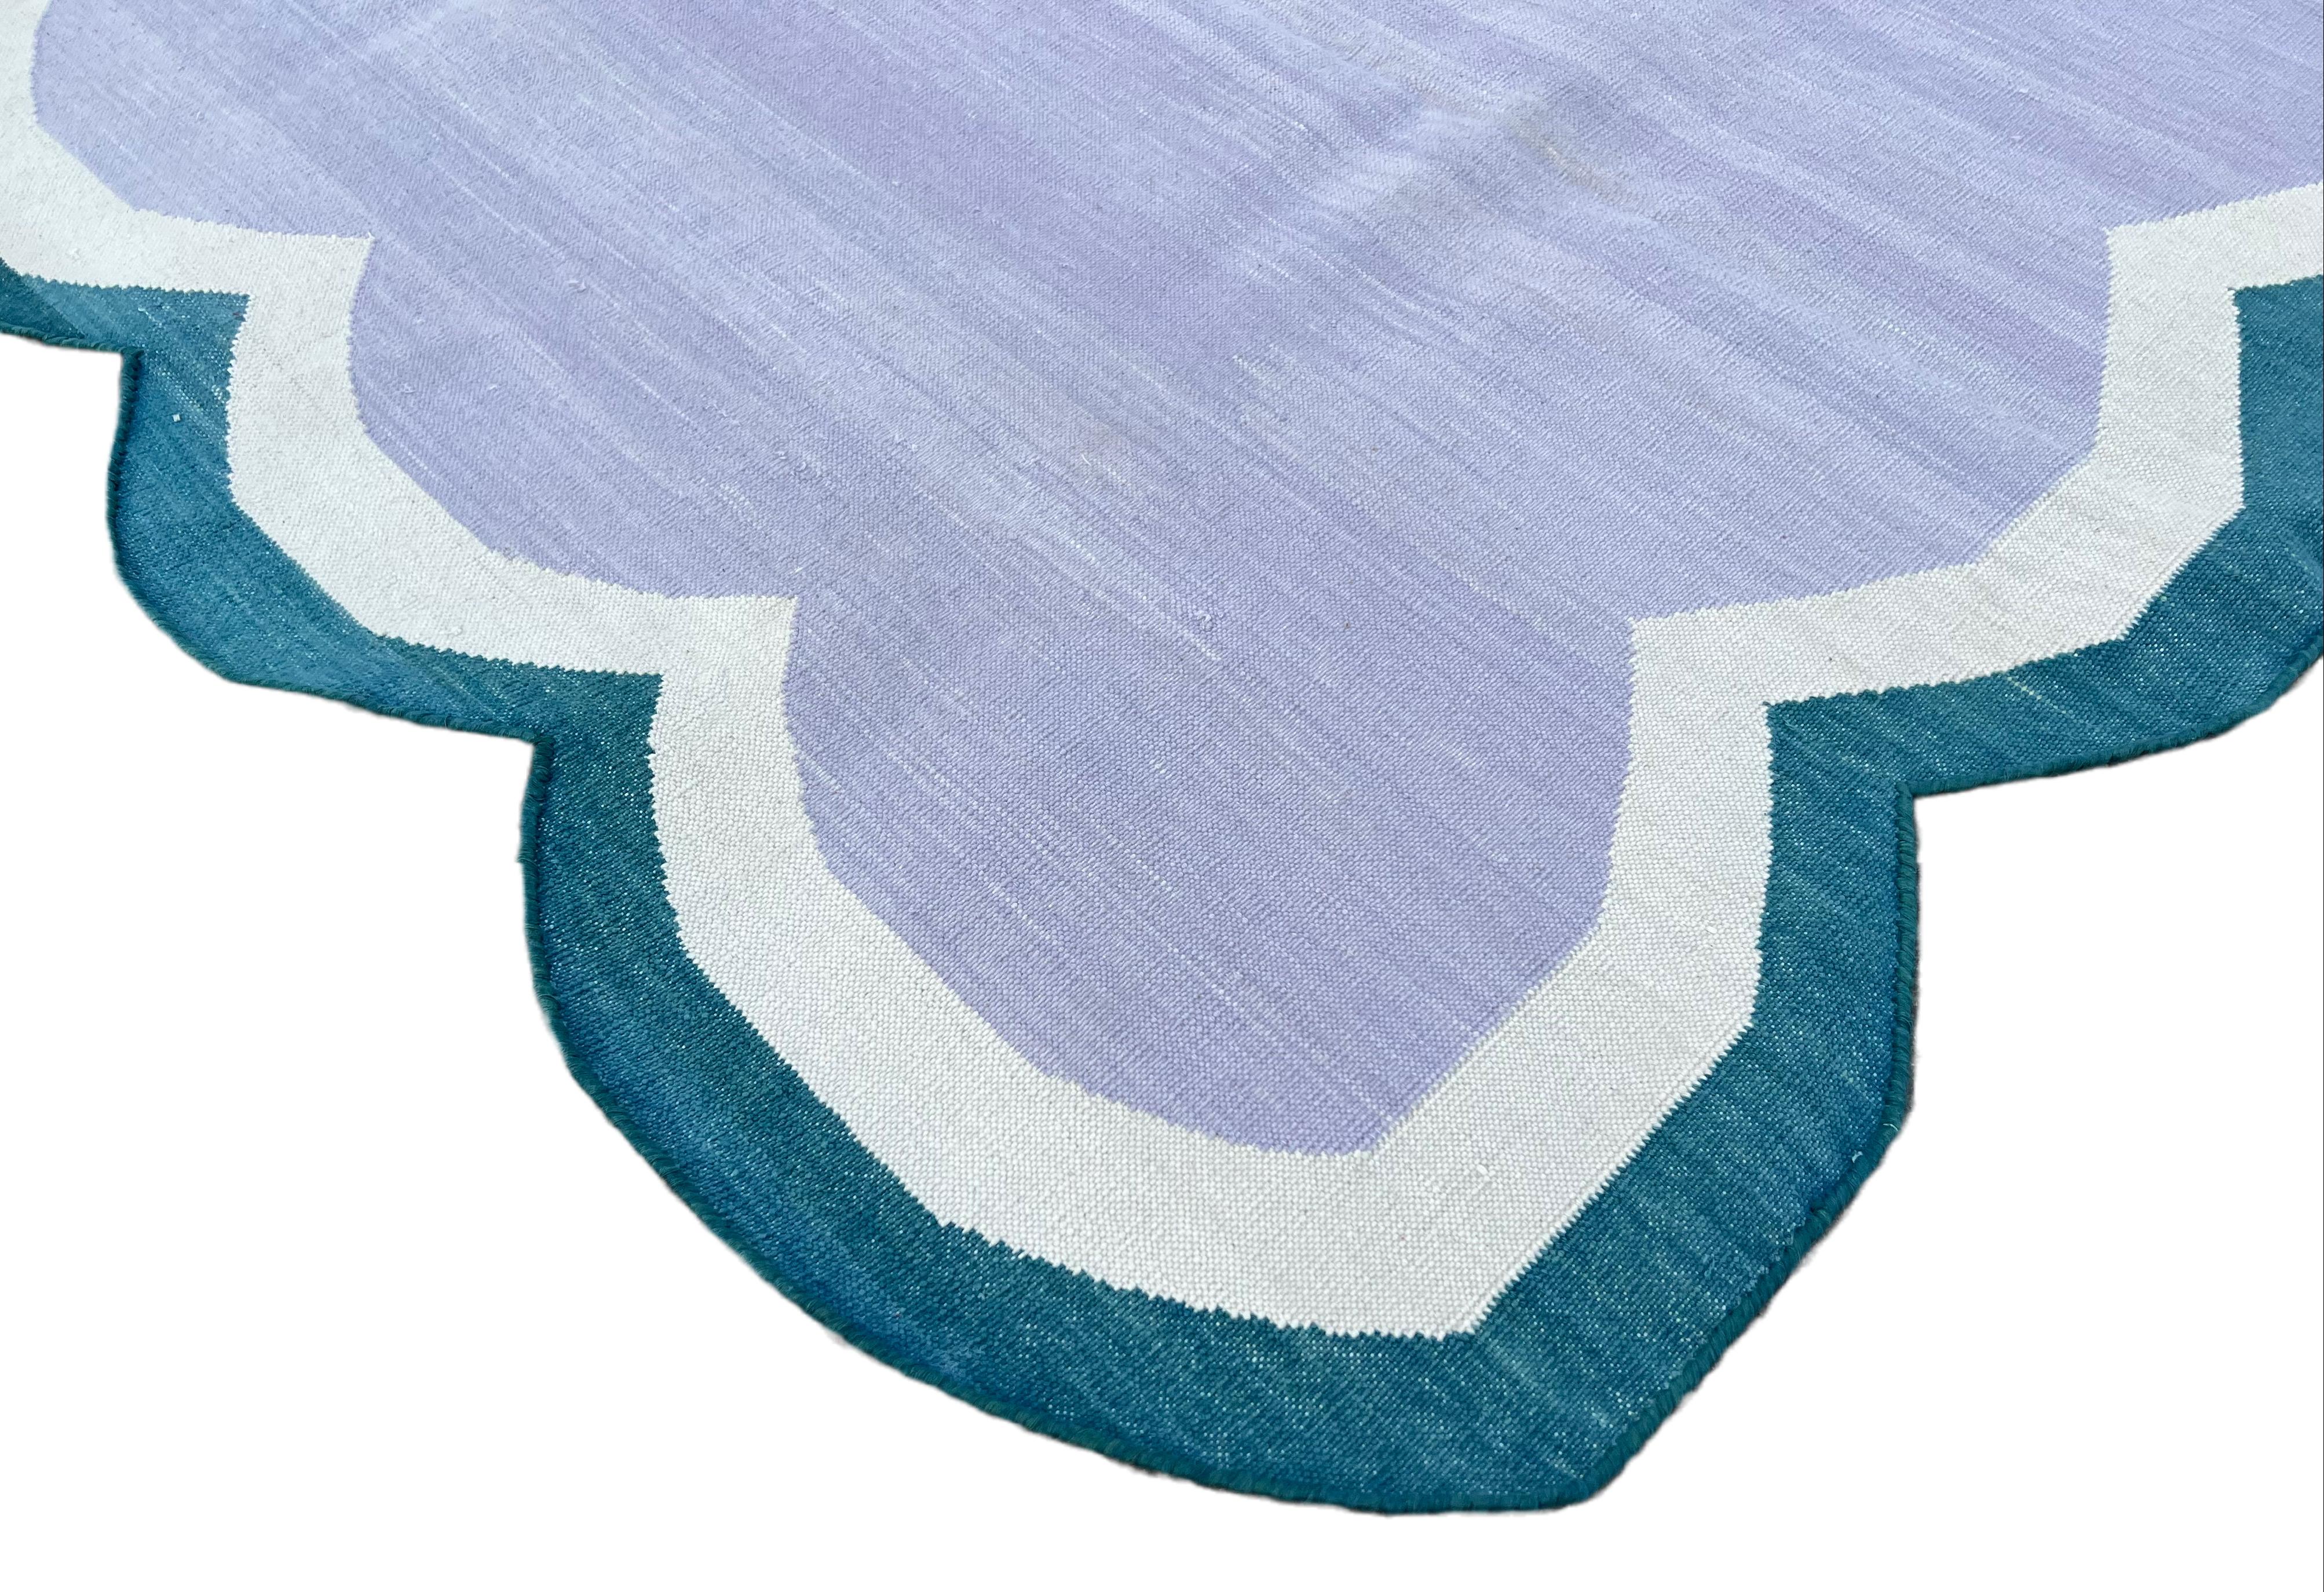 Mid-Century Modern Handmade Cotton Area Flat Weave Rug, 3x5 Lavender And Blue Scallop Kilim Dhurrie For Sale